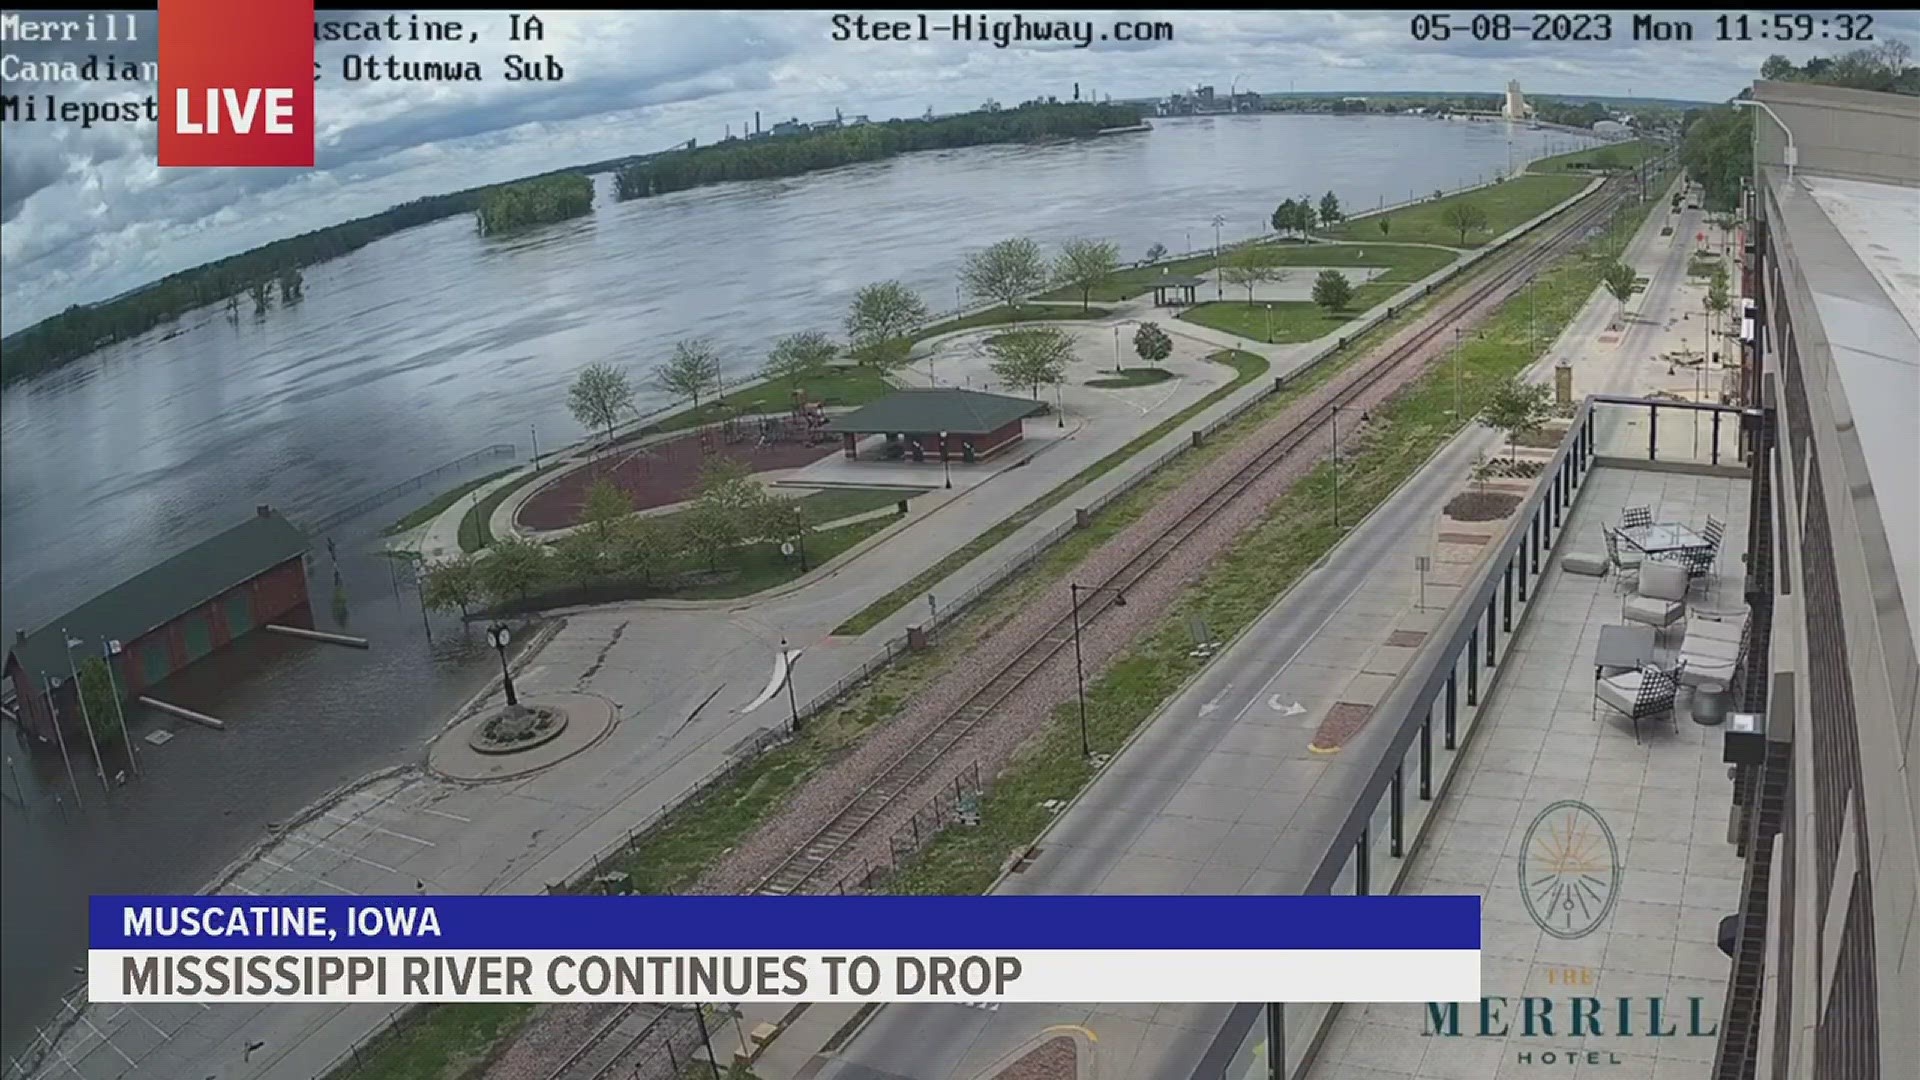 As Mississippi River levels continue to drop, cleanup efforts start across the Quad Cities.